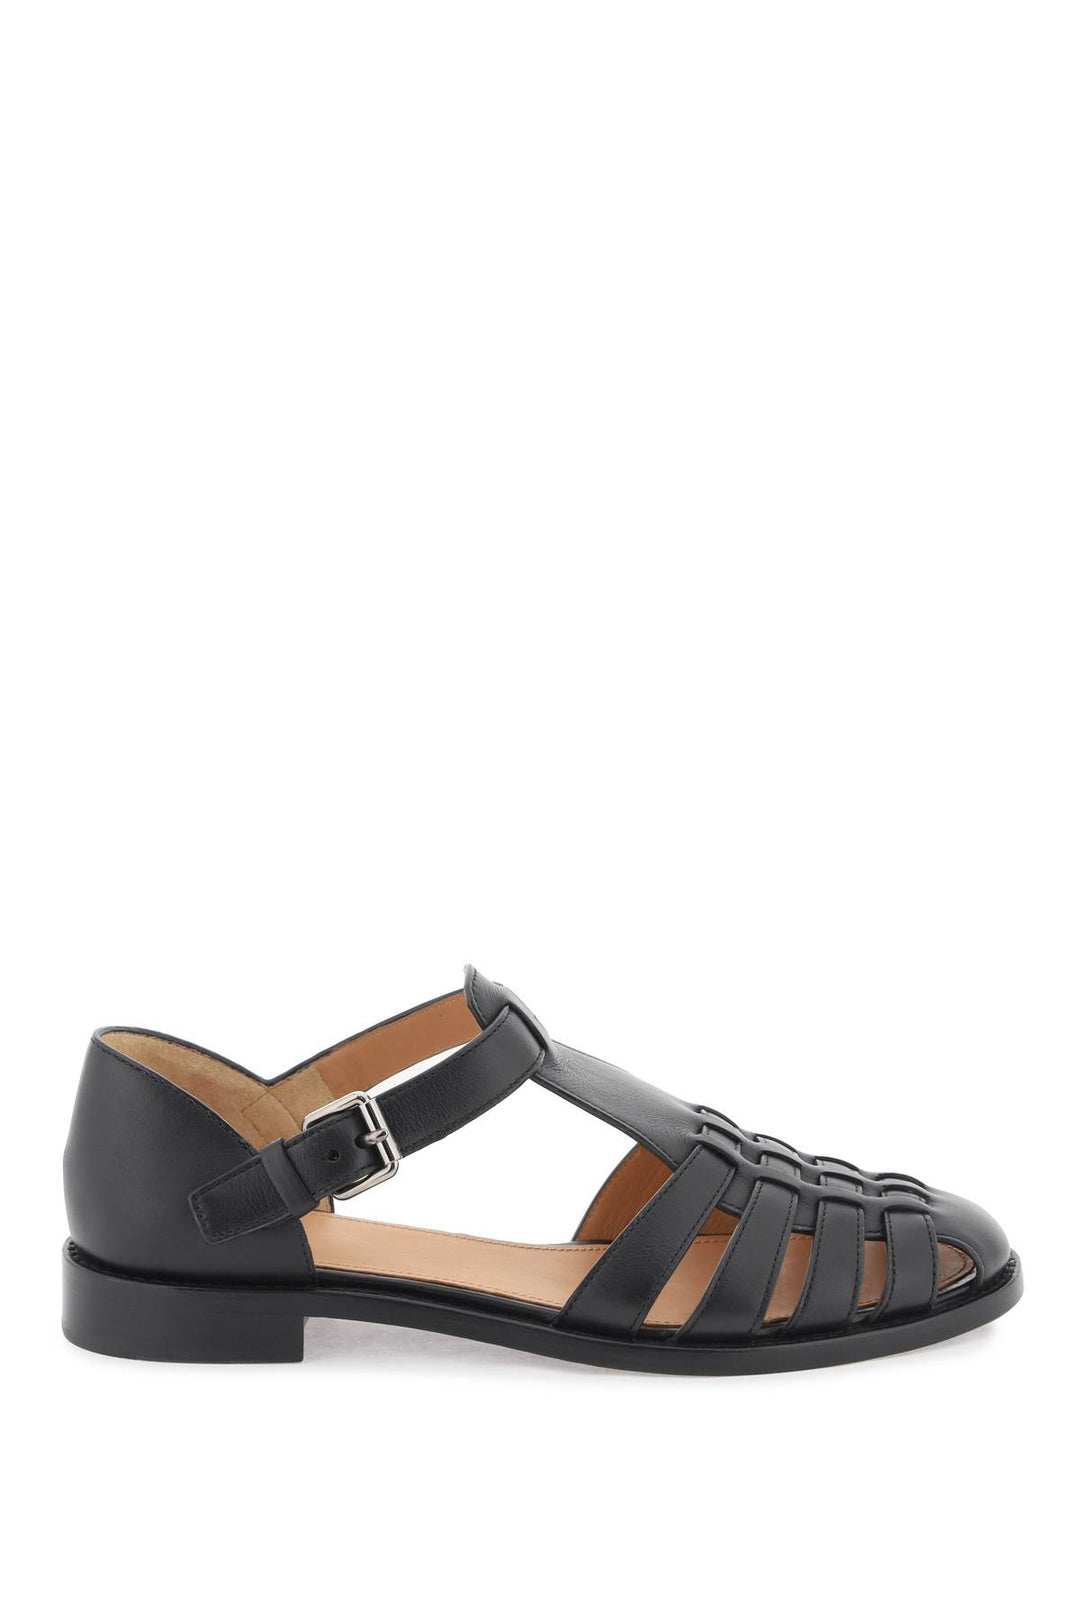 Church's Kelsey Cage Sandals   Nero